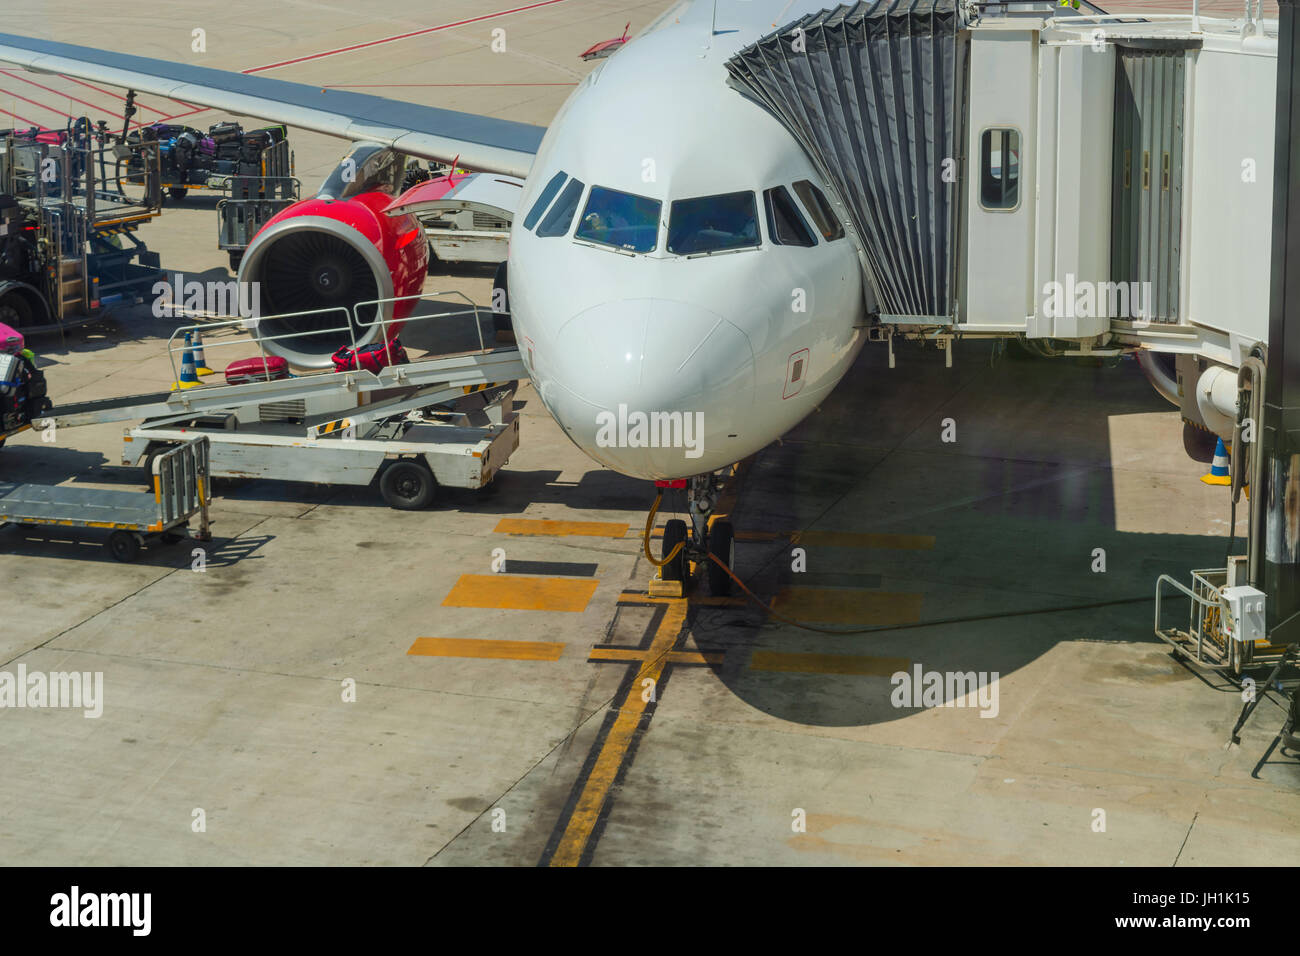 Airport of Mallorca, airplane in departure area during loading and refueling ready for departure. Stock Photo